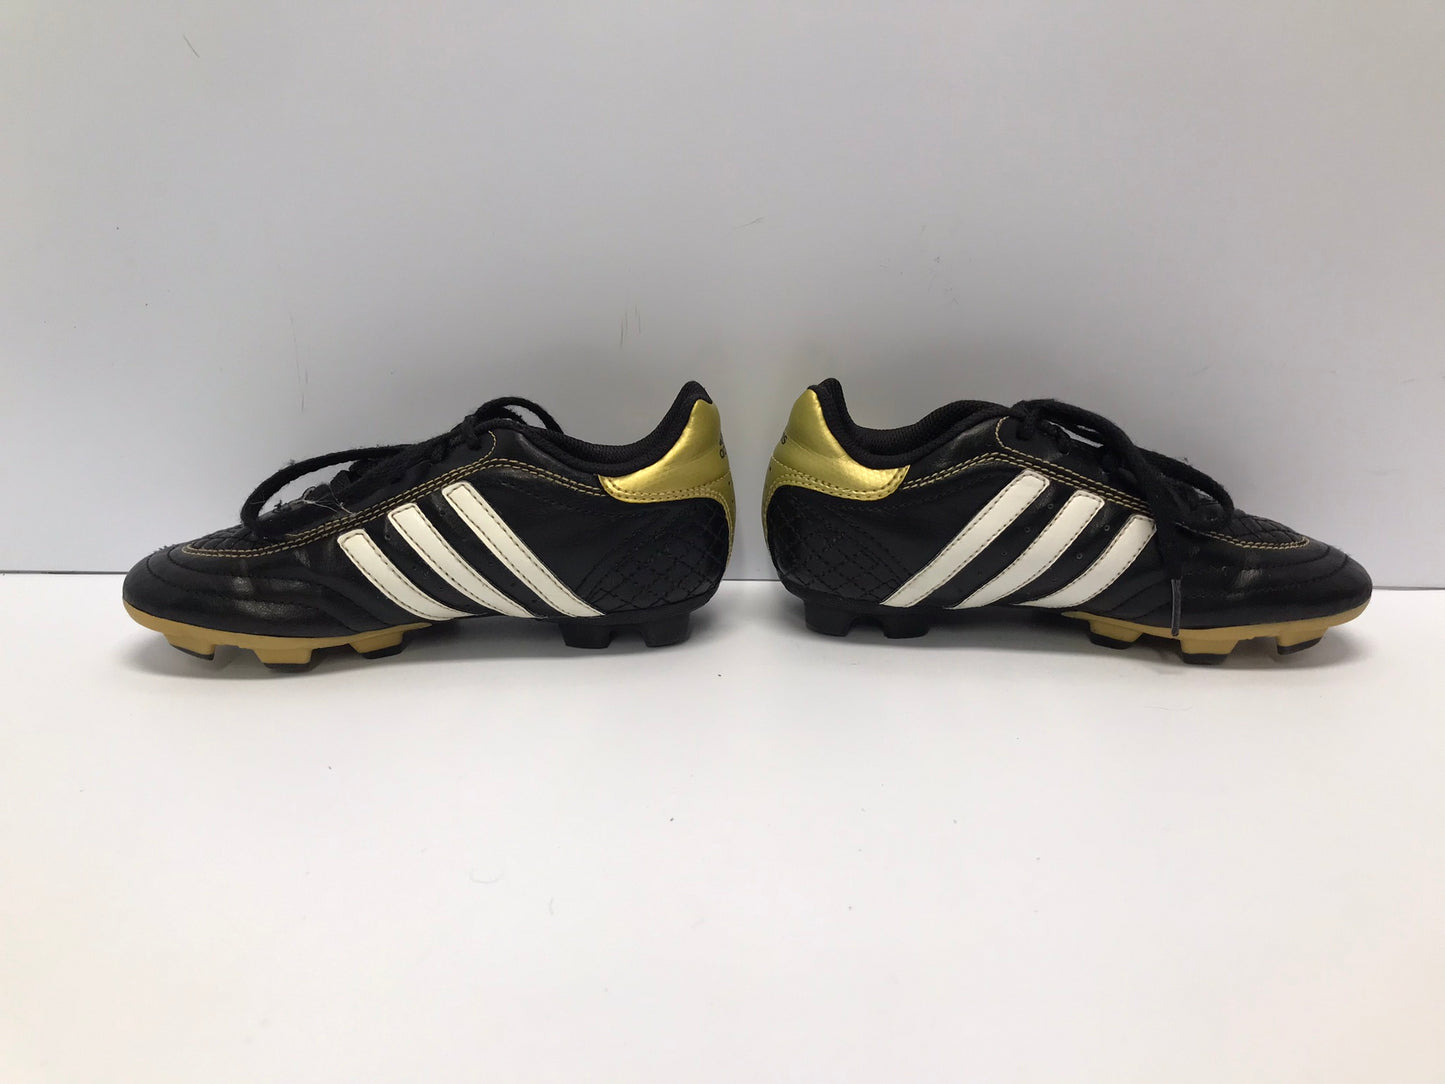 Soccer Shoes Cleats Child Size 1 Adidas Black Gold Excellent